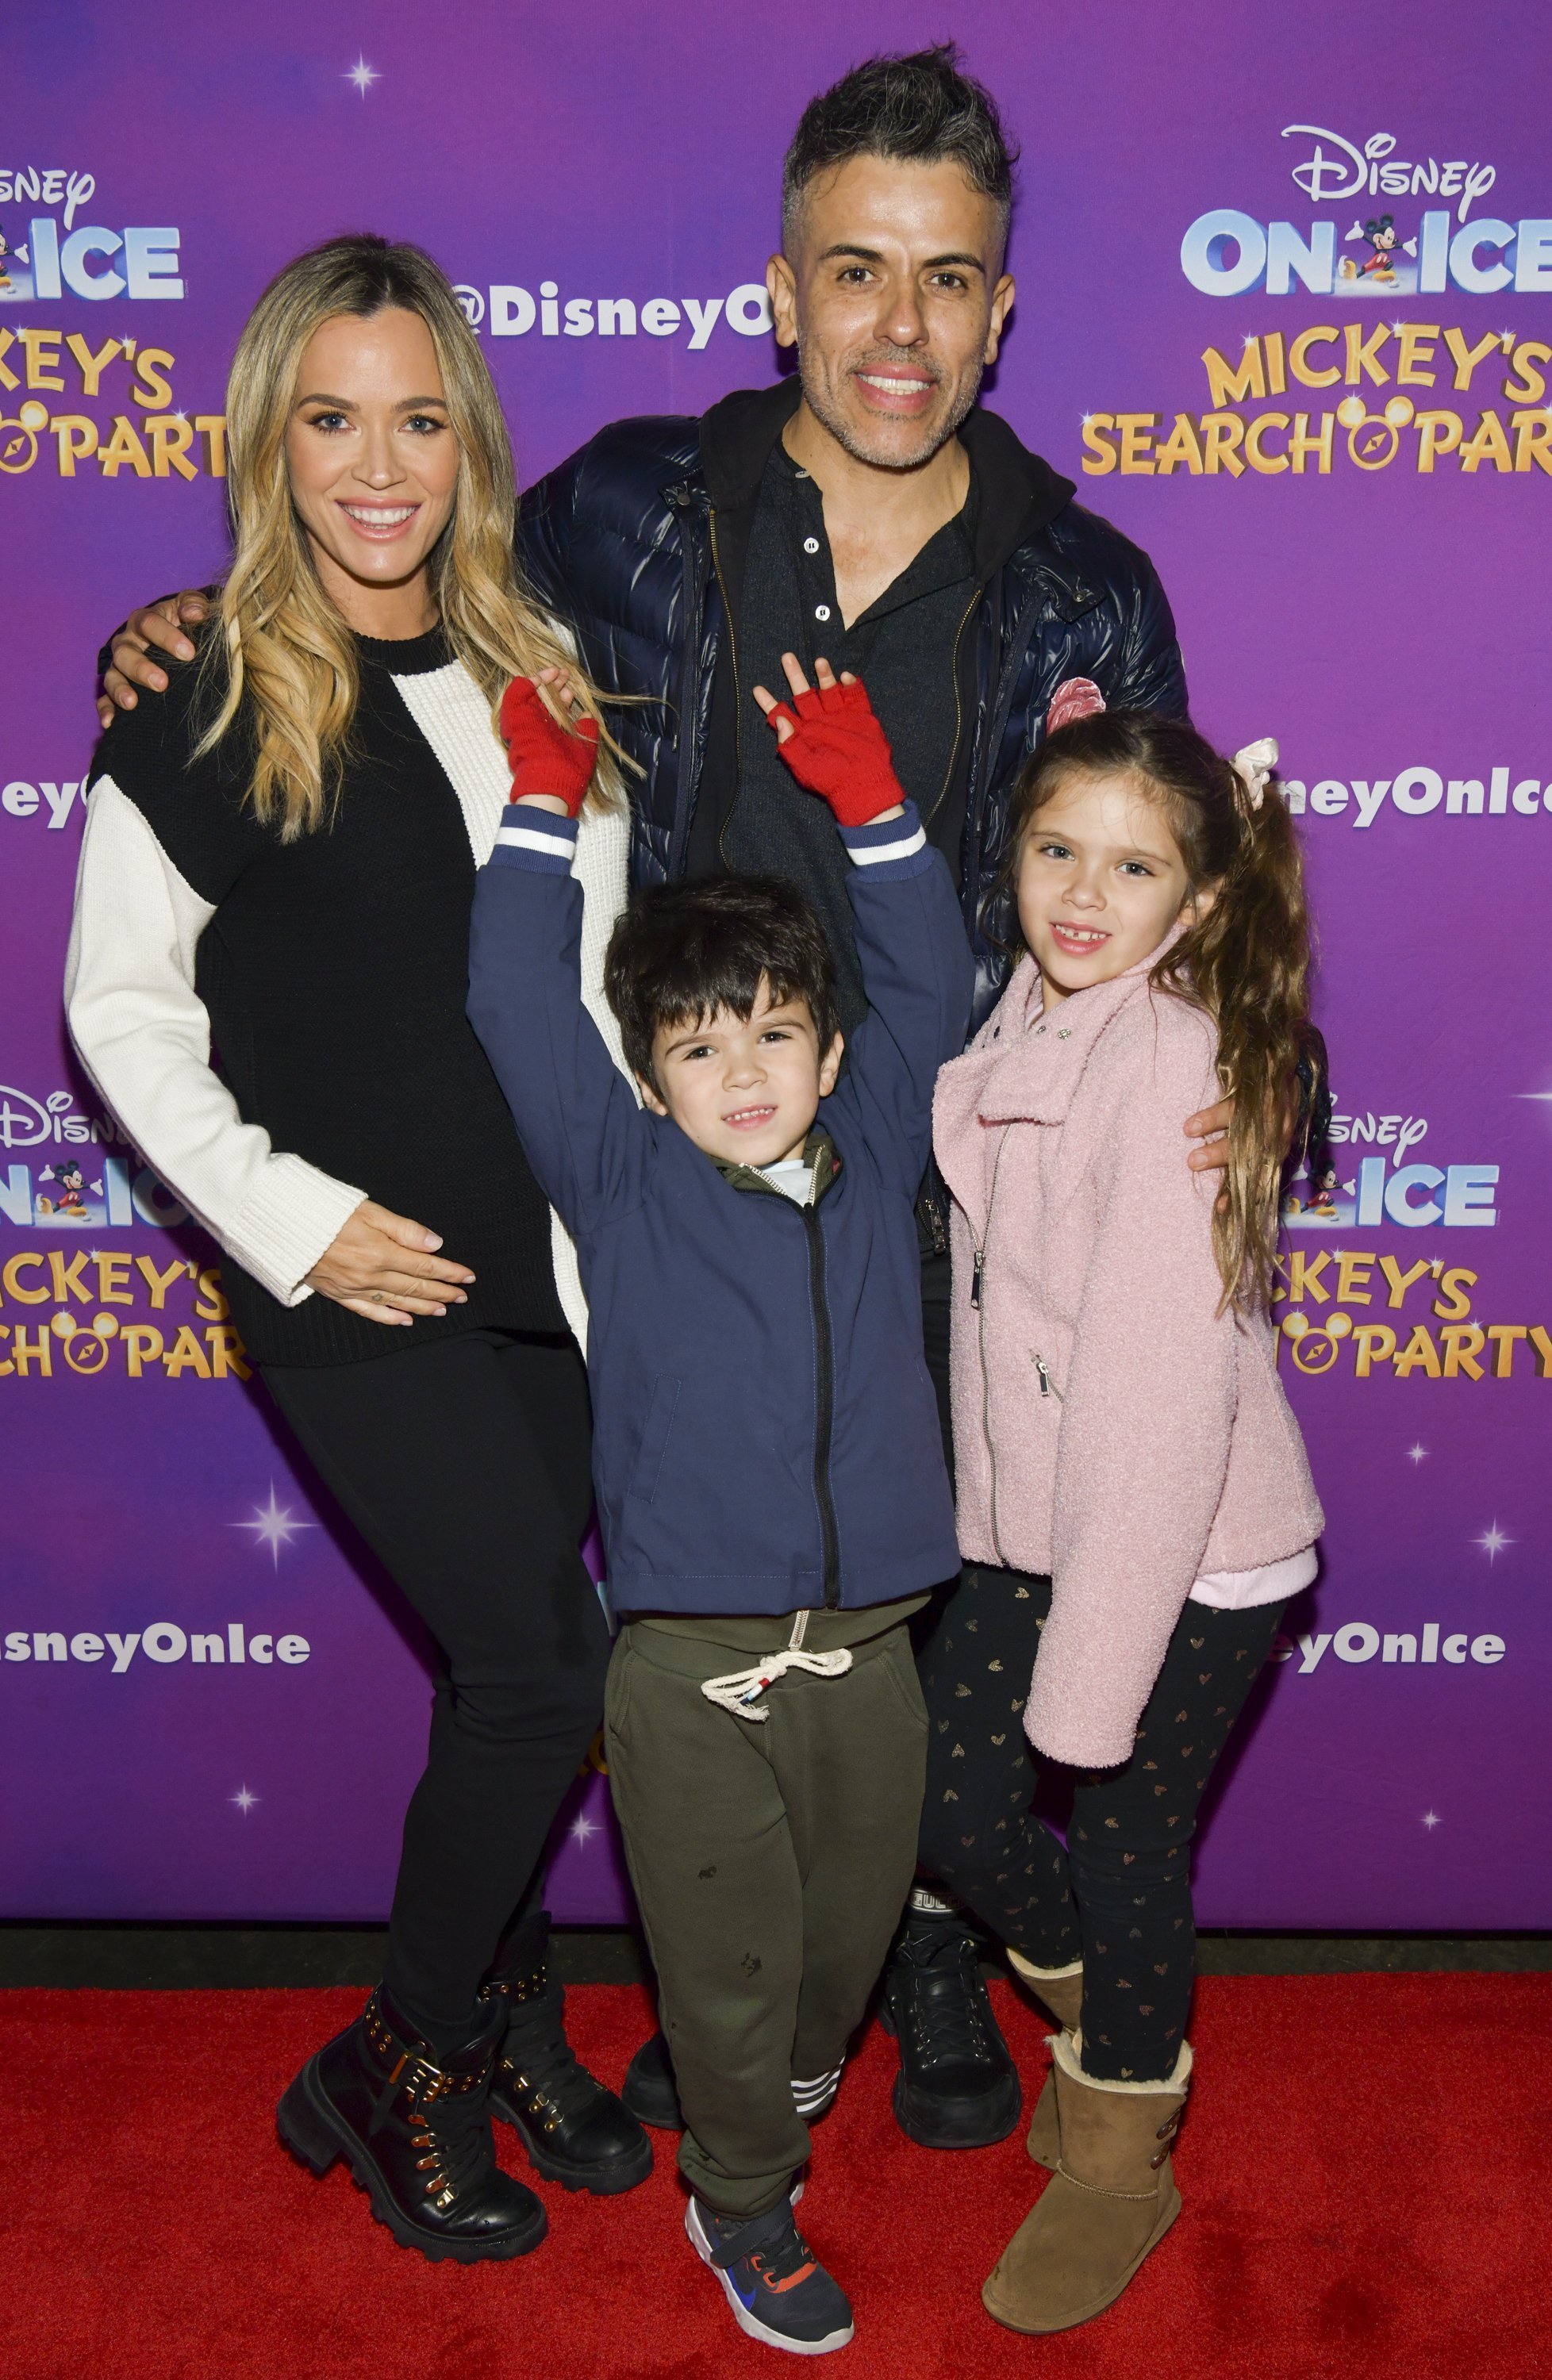 Teddi Mellencamp, Cruz Arroyave, Edwin Arroyave, and Slate Arroyave attend 2019 Disney On Ice "Mickey's Search Party" on December 13, 2019, in Los Angeles, California. | Source: Getty Images.